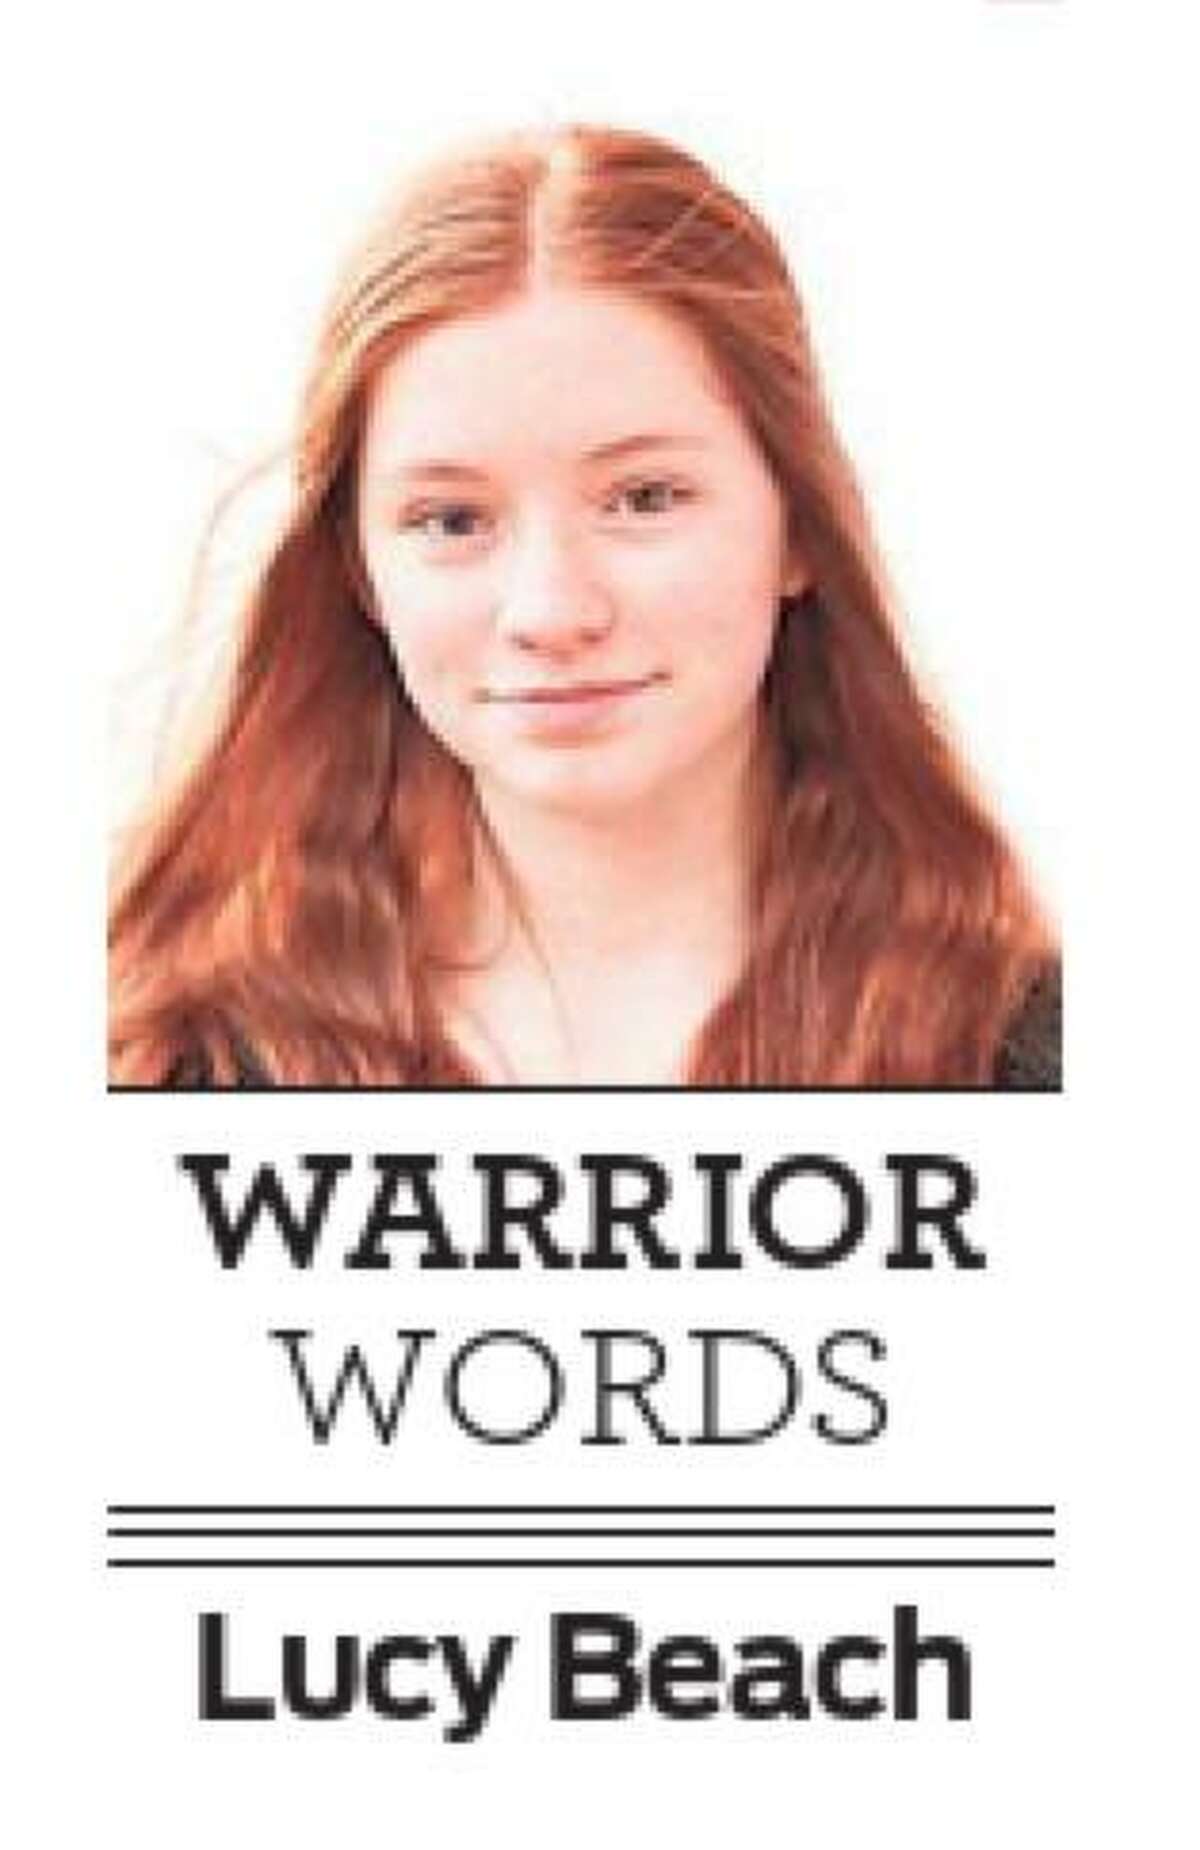 Lucy Beach, shown, a junior, is one of 10 students at Wilton High School, who are contributing their own typed pieces to this column titled “Warrior Words” for publishing in the Wilton Bulletin, and on wiltonbulletin.com, for an abbreviated 2021-22 second semester, before a full 2022-2023 academic school year.